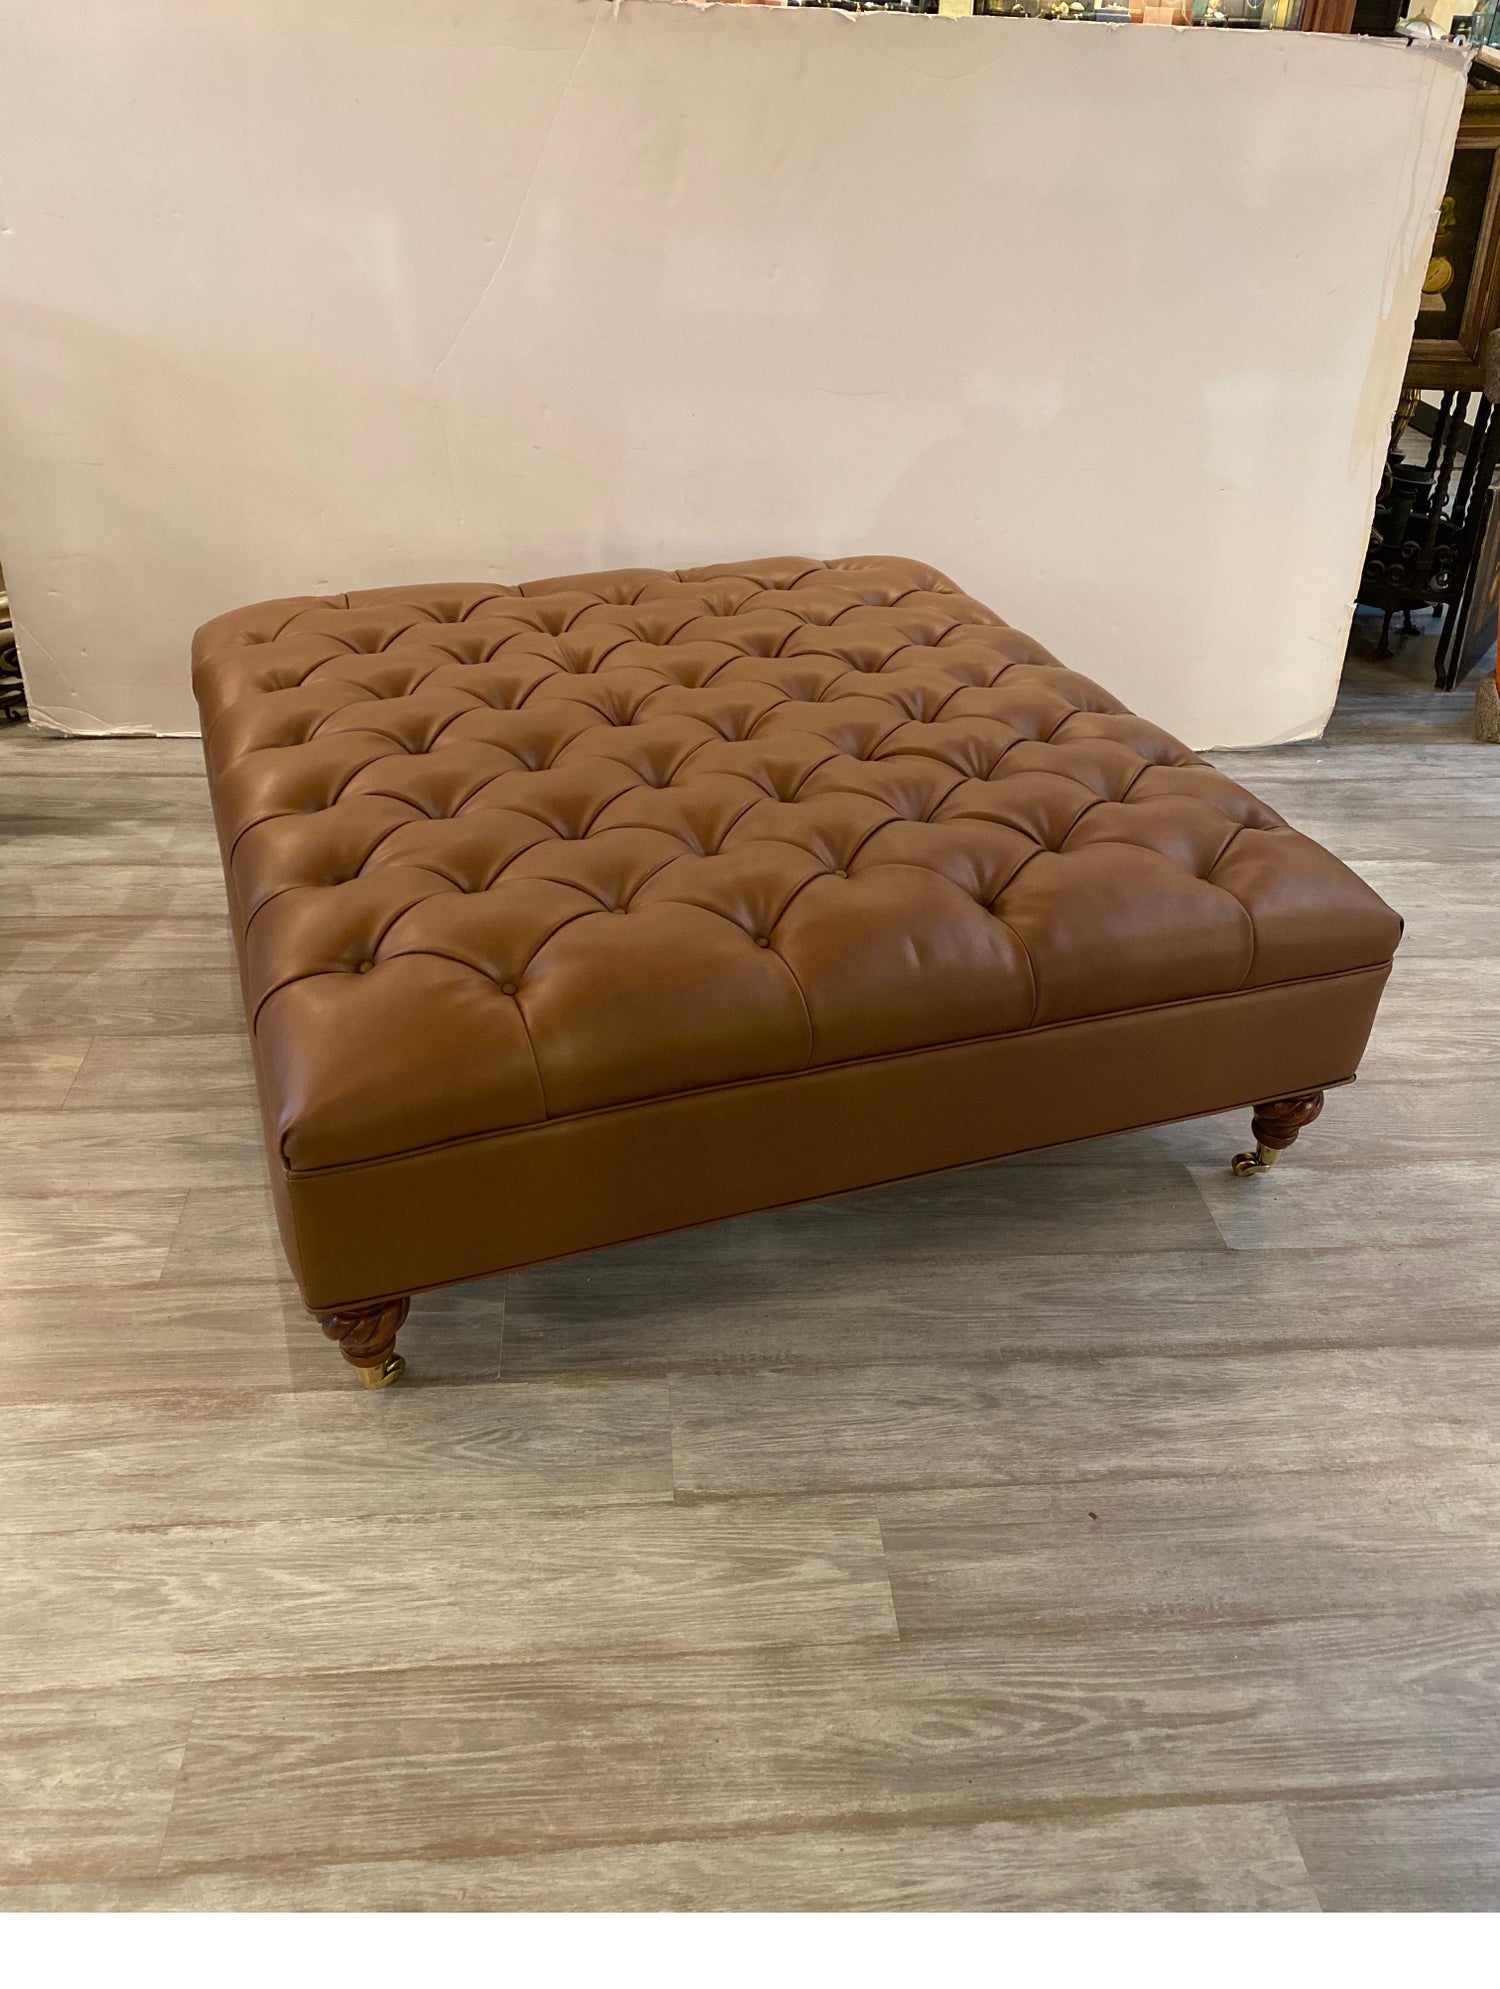 Oversized Biscuit Tufted Leather Ottoman/Cocktail Table For Sale at 1stDibs